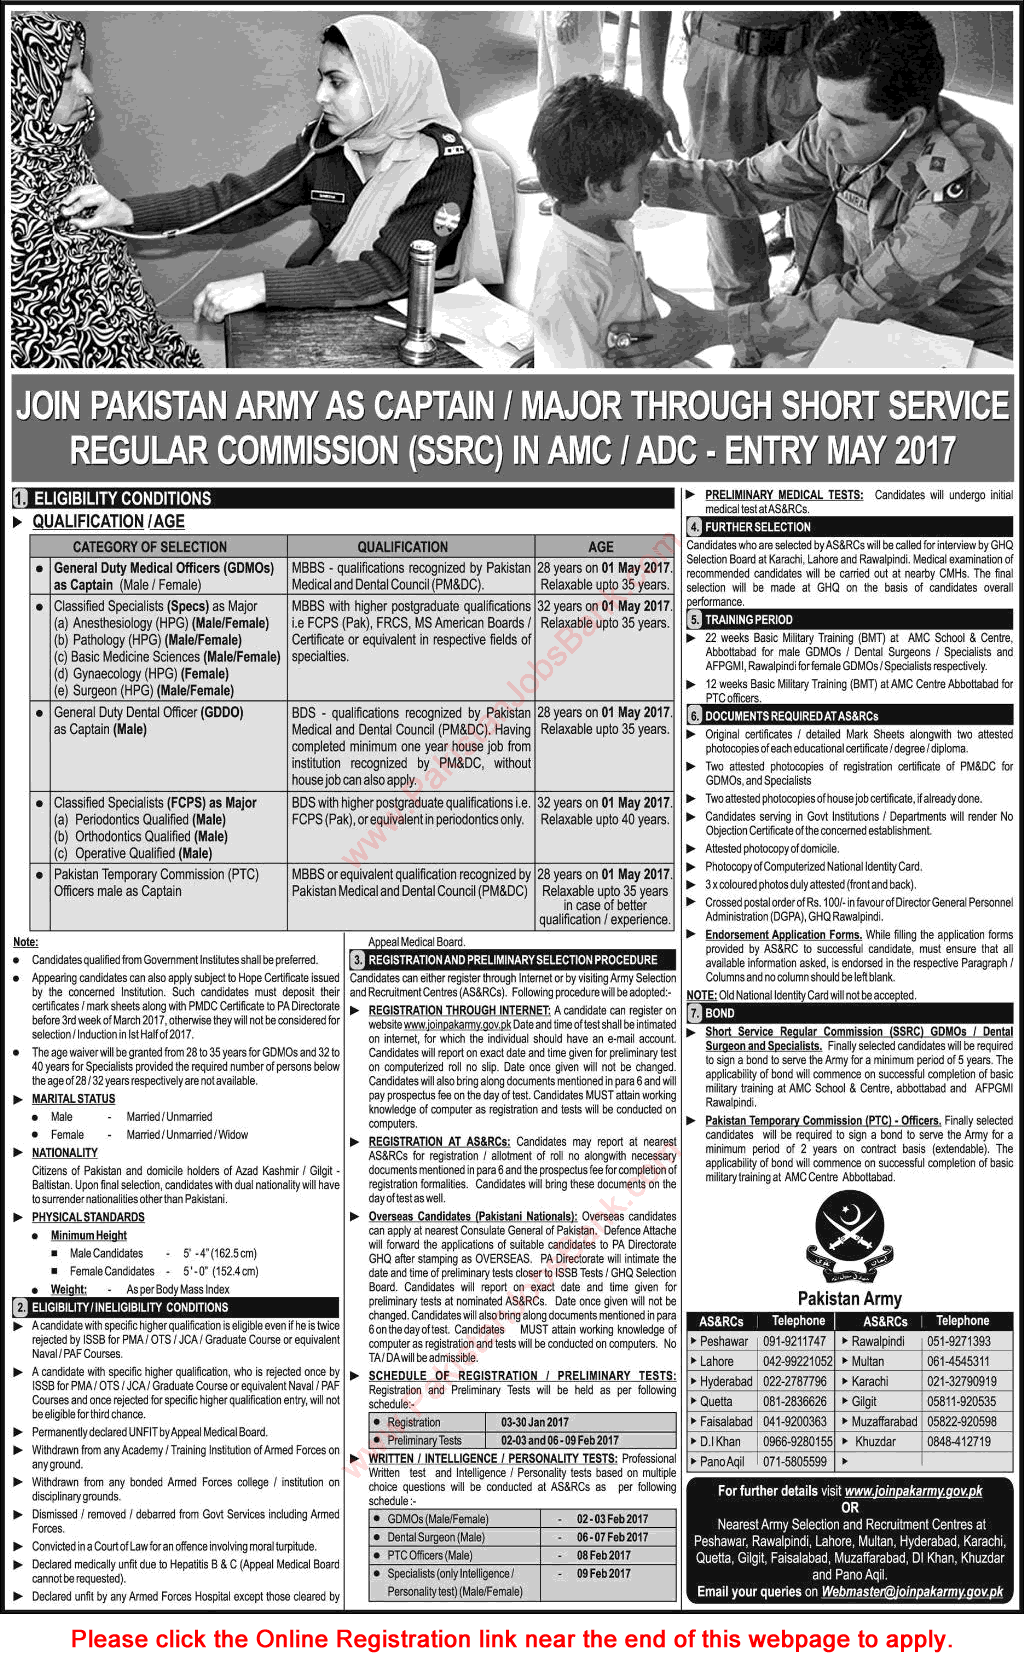 Join Pakistan Army as GDMO / Specialists 2017 through Short Service Regular Commission Online Registration Latest